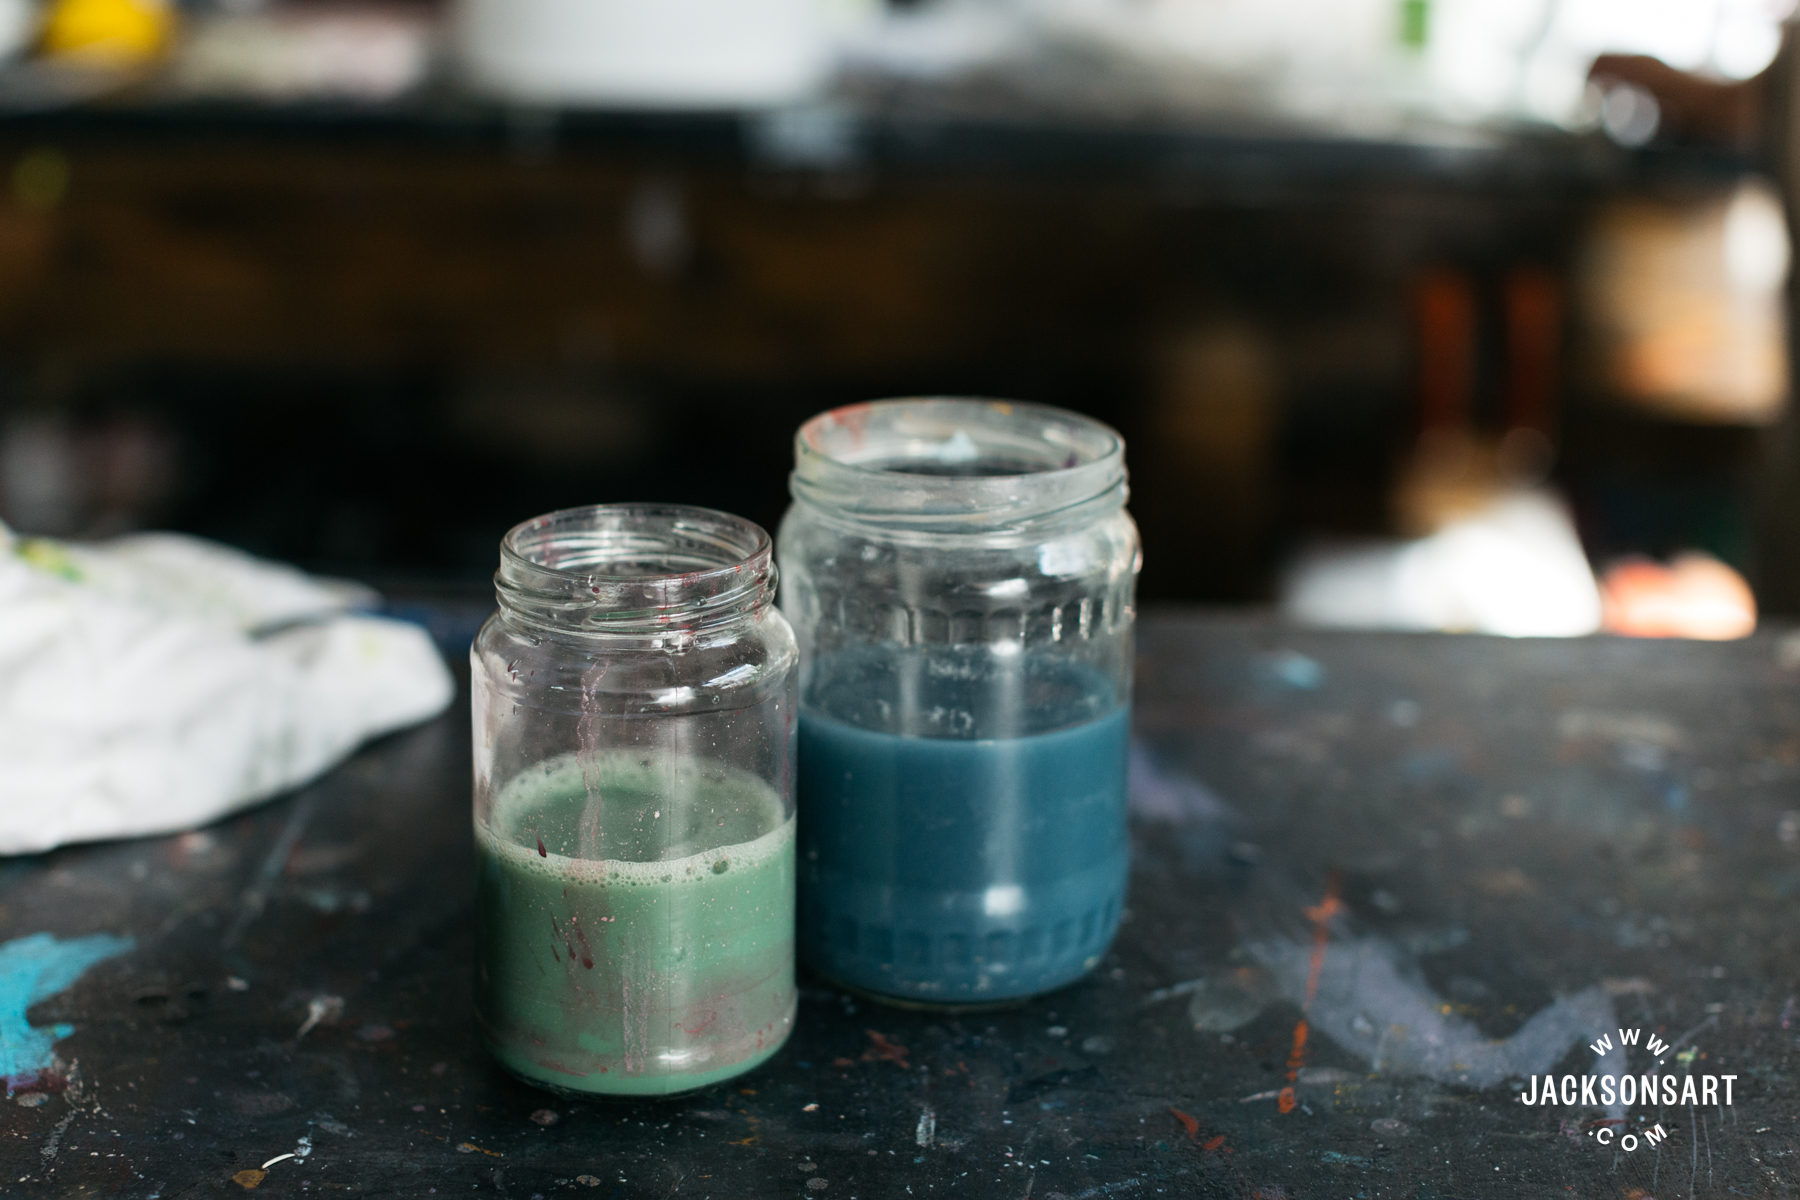 How to choose the best paper for acrylic paint - Gathered